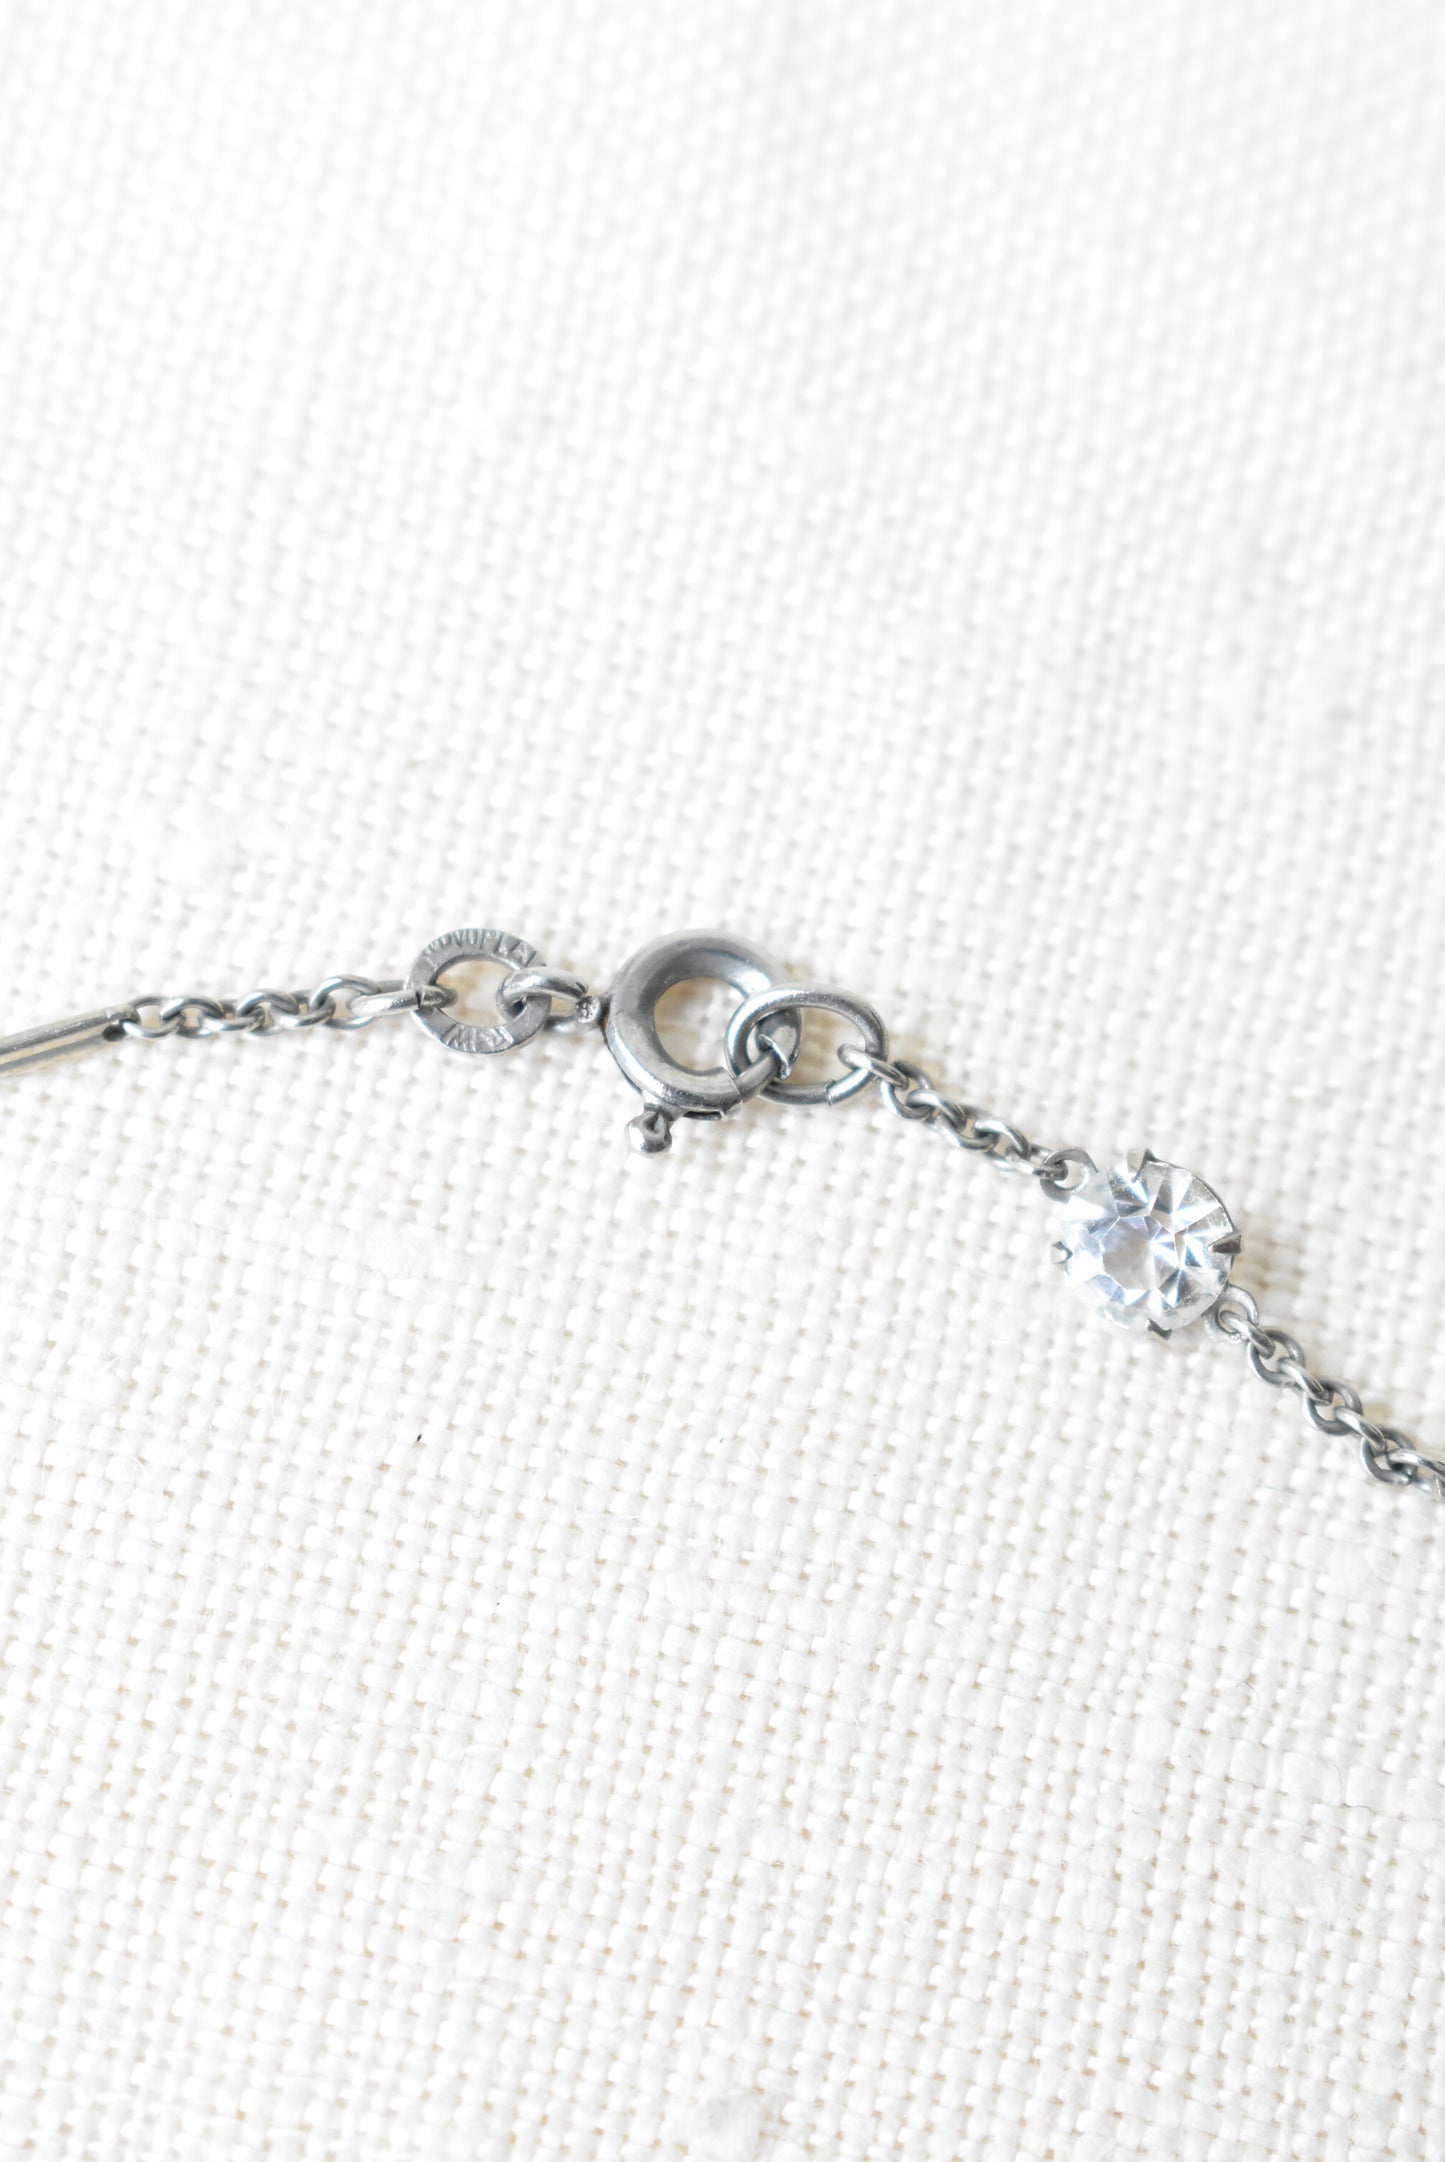 Vintage necklace silvery chain with cut glass insets